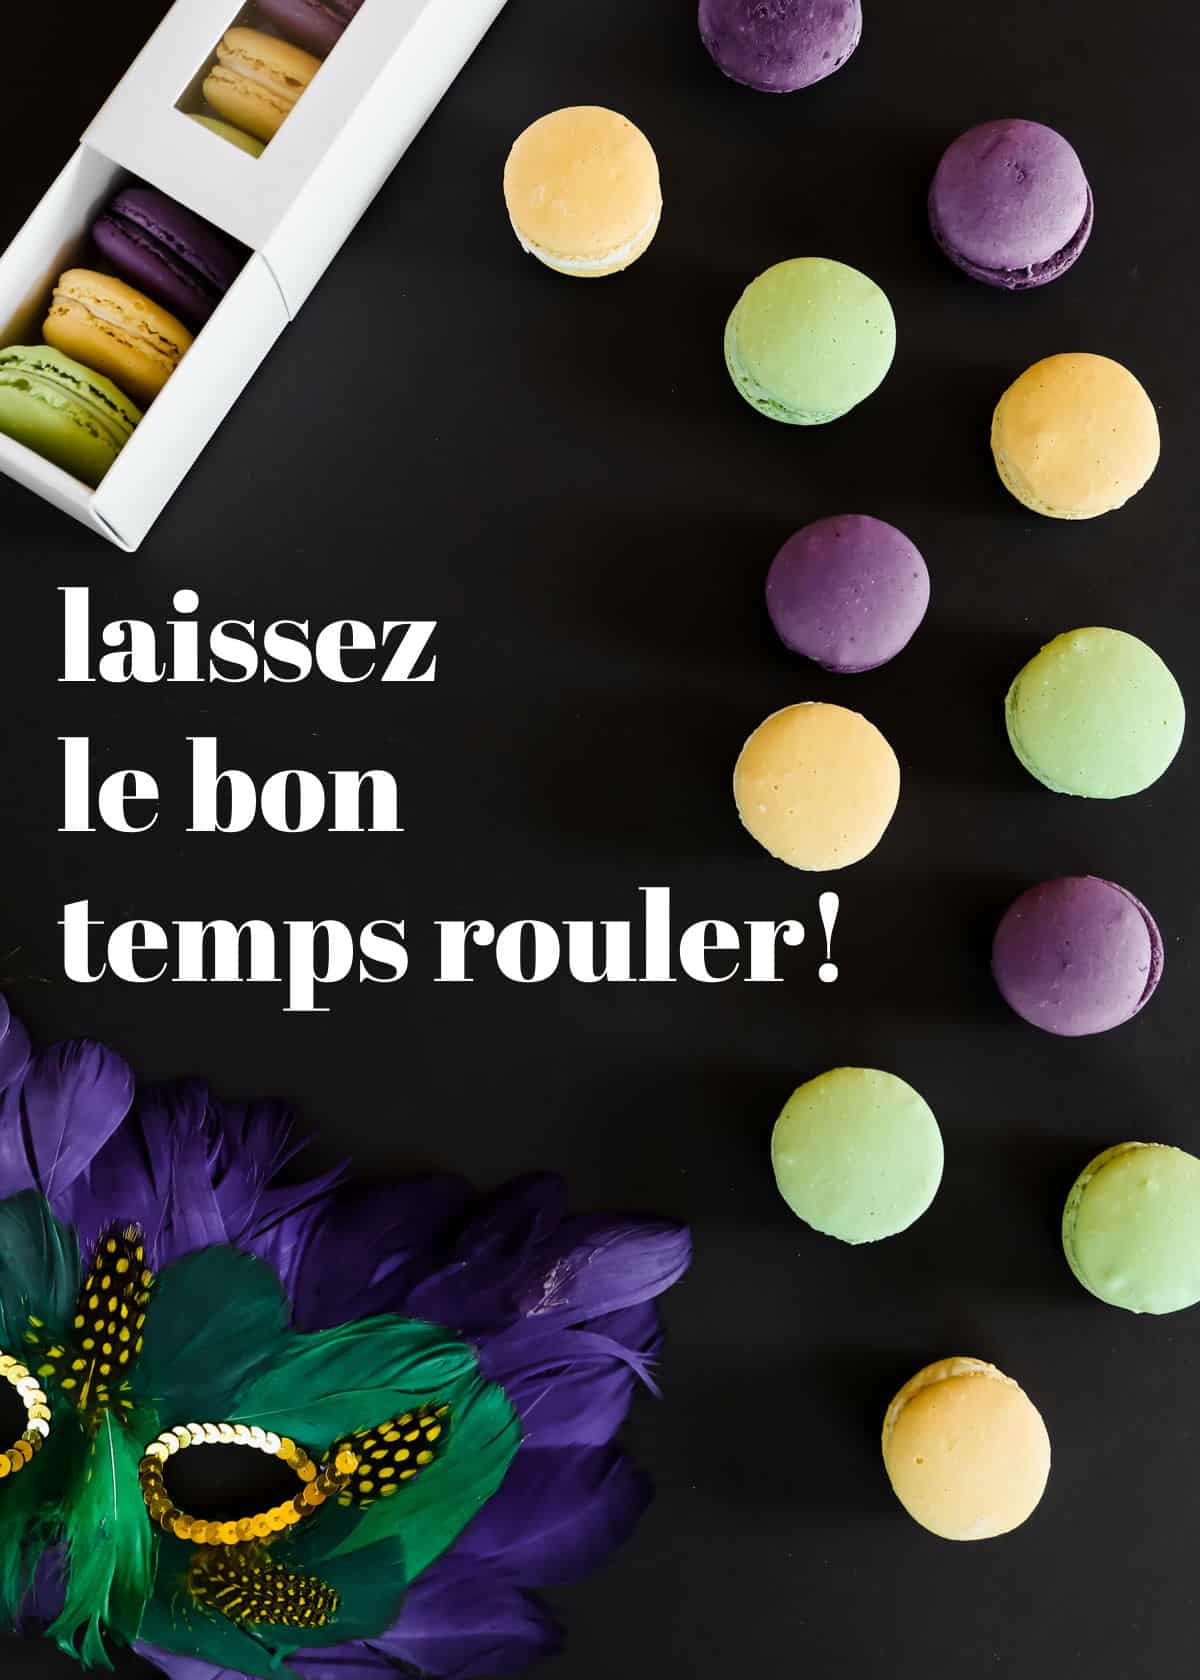 black background with macarons and mardi gras mask and text says laissez le bon temps rouler!